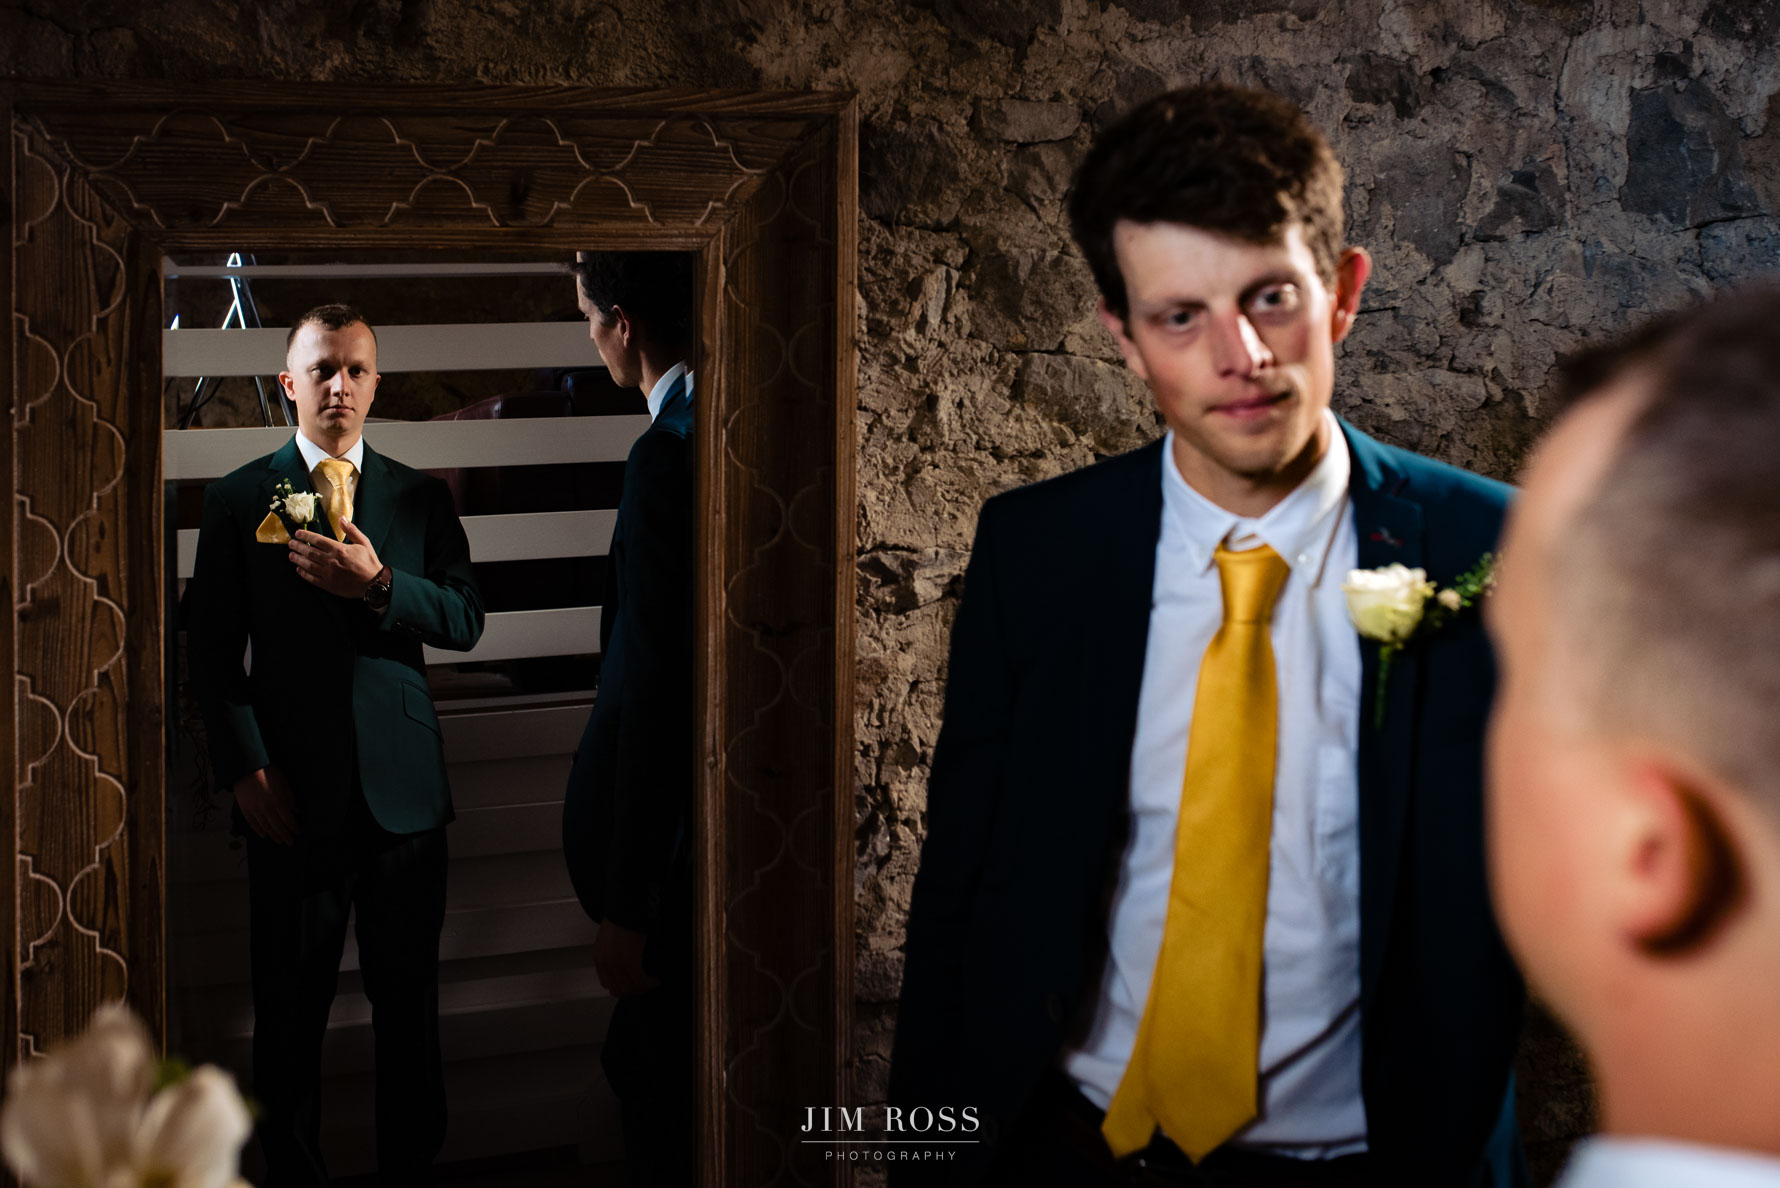 mirror shot of groom and brother with button holes